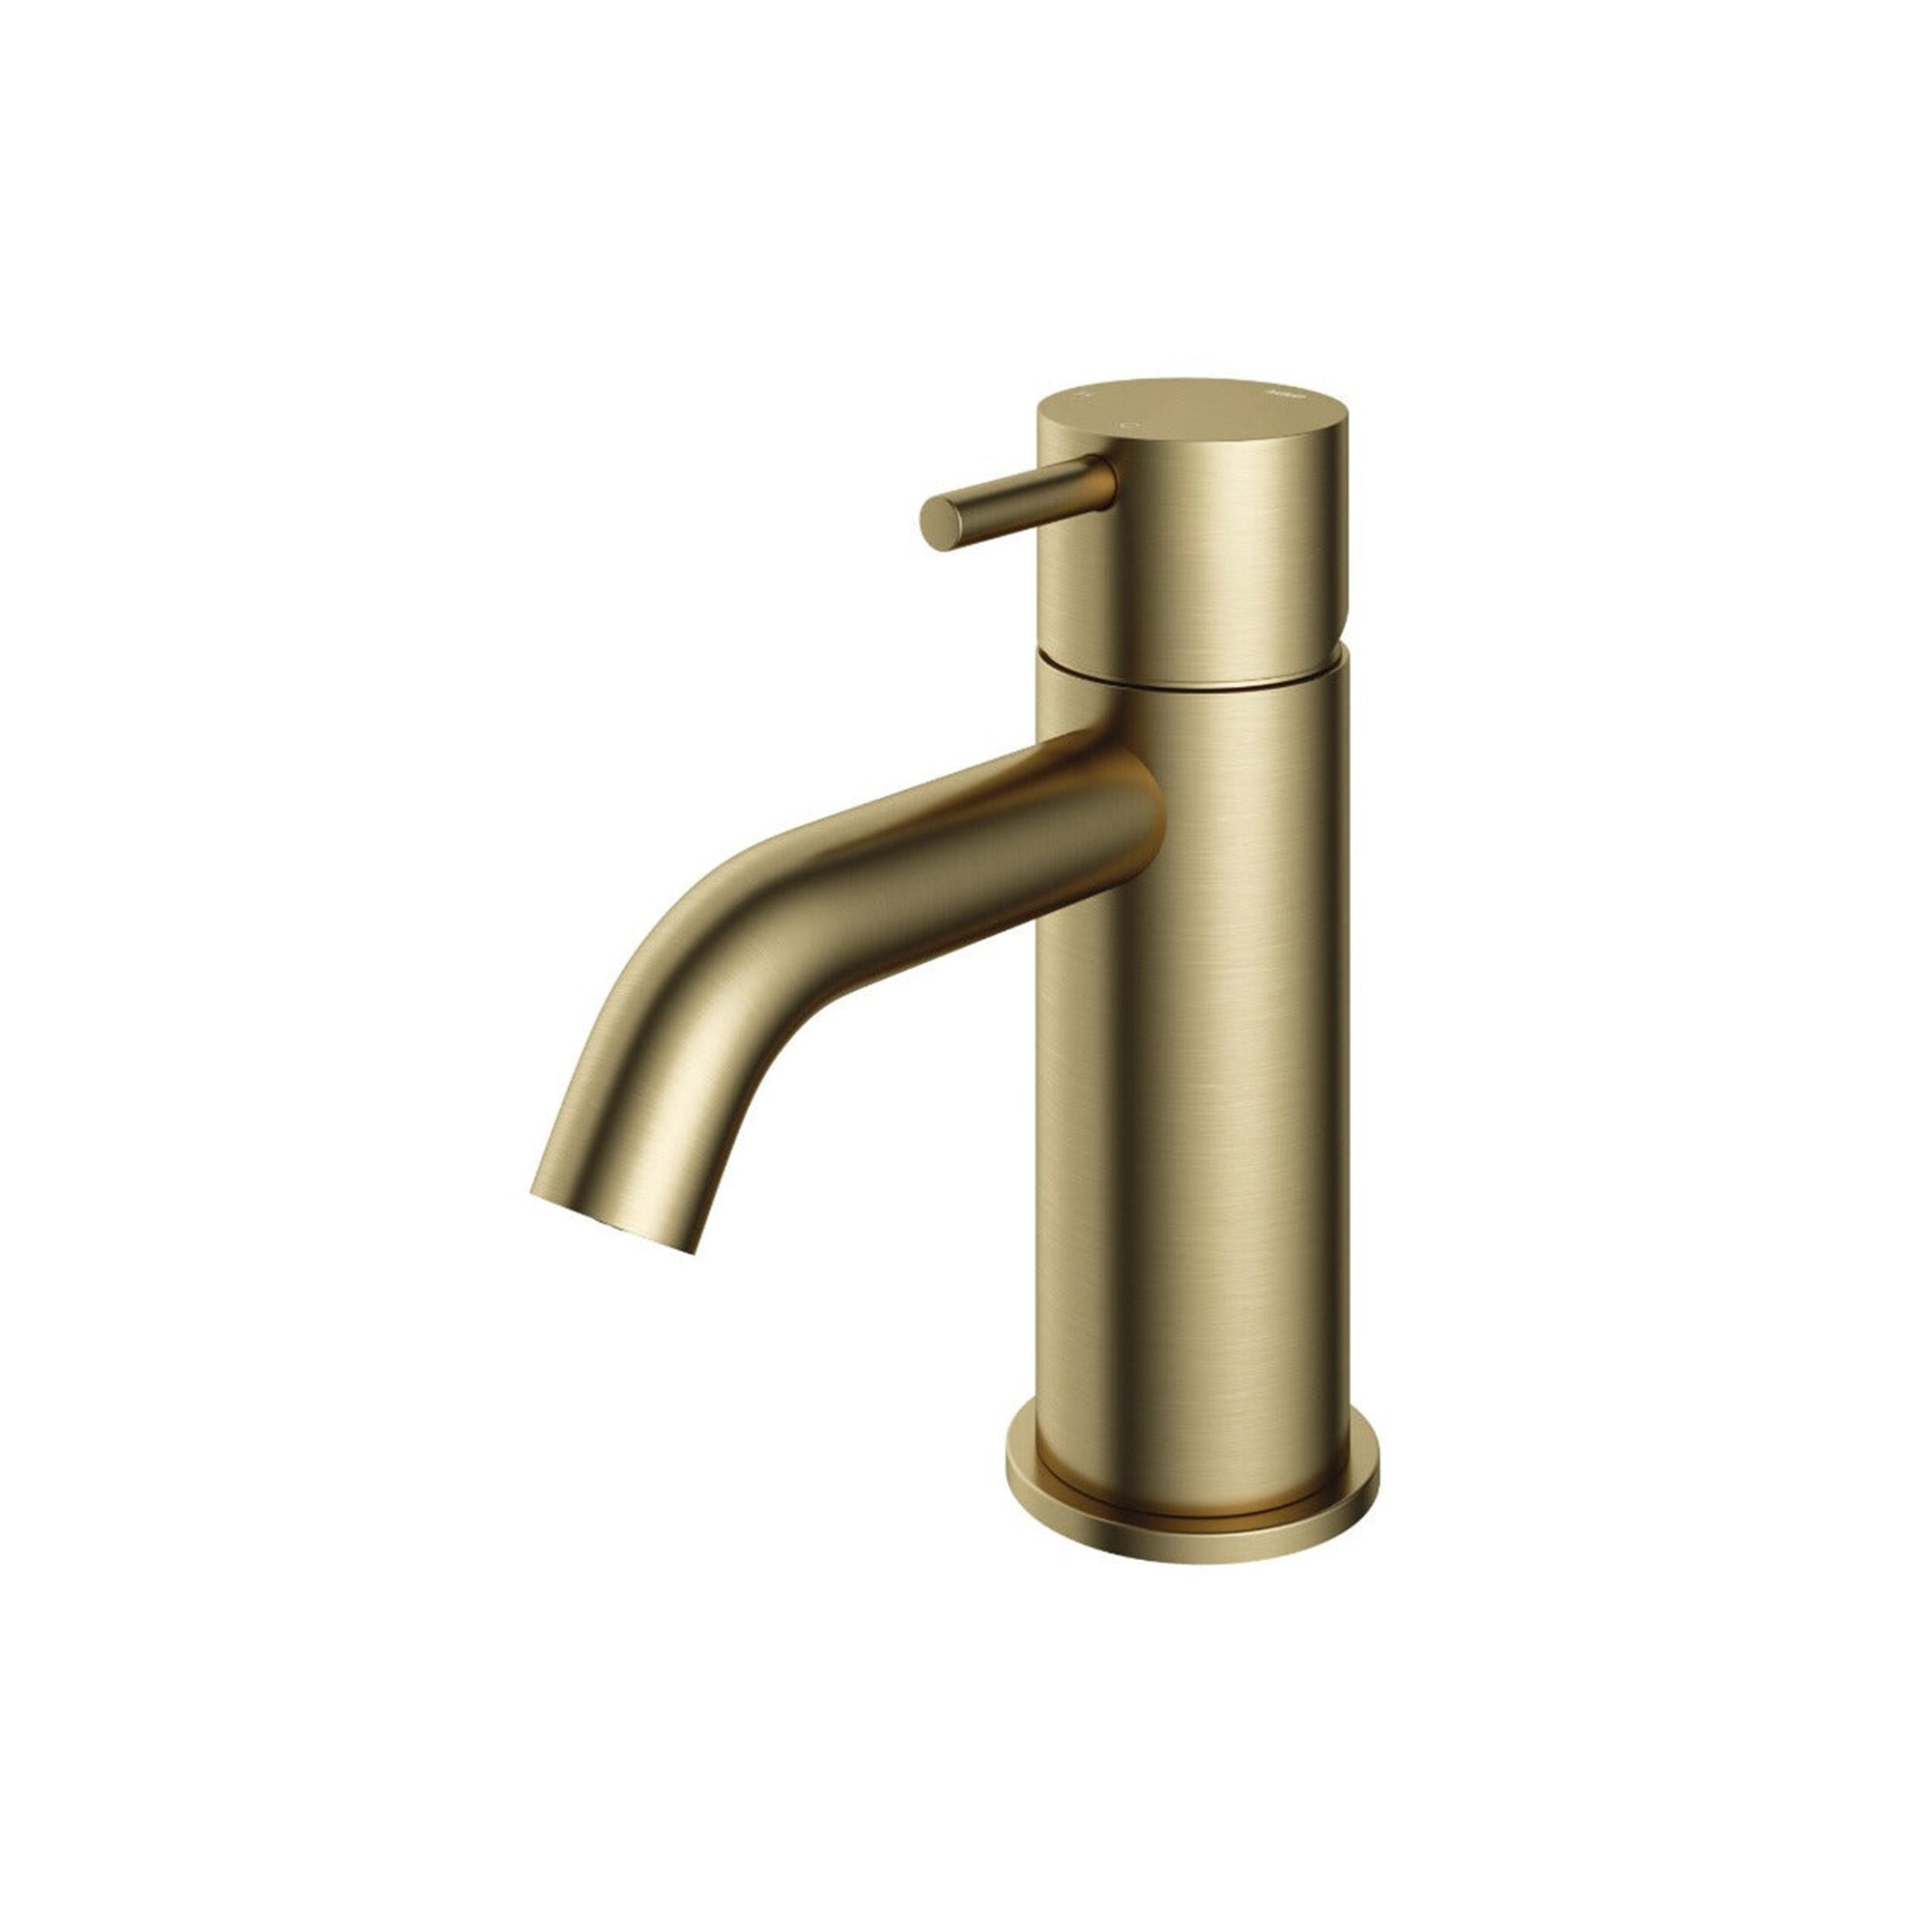 cobber basin mixer tap monobloc curved spout brushed brass